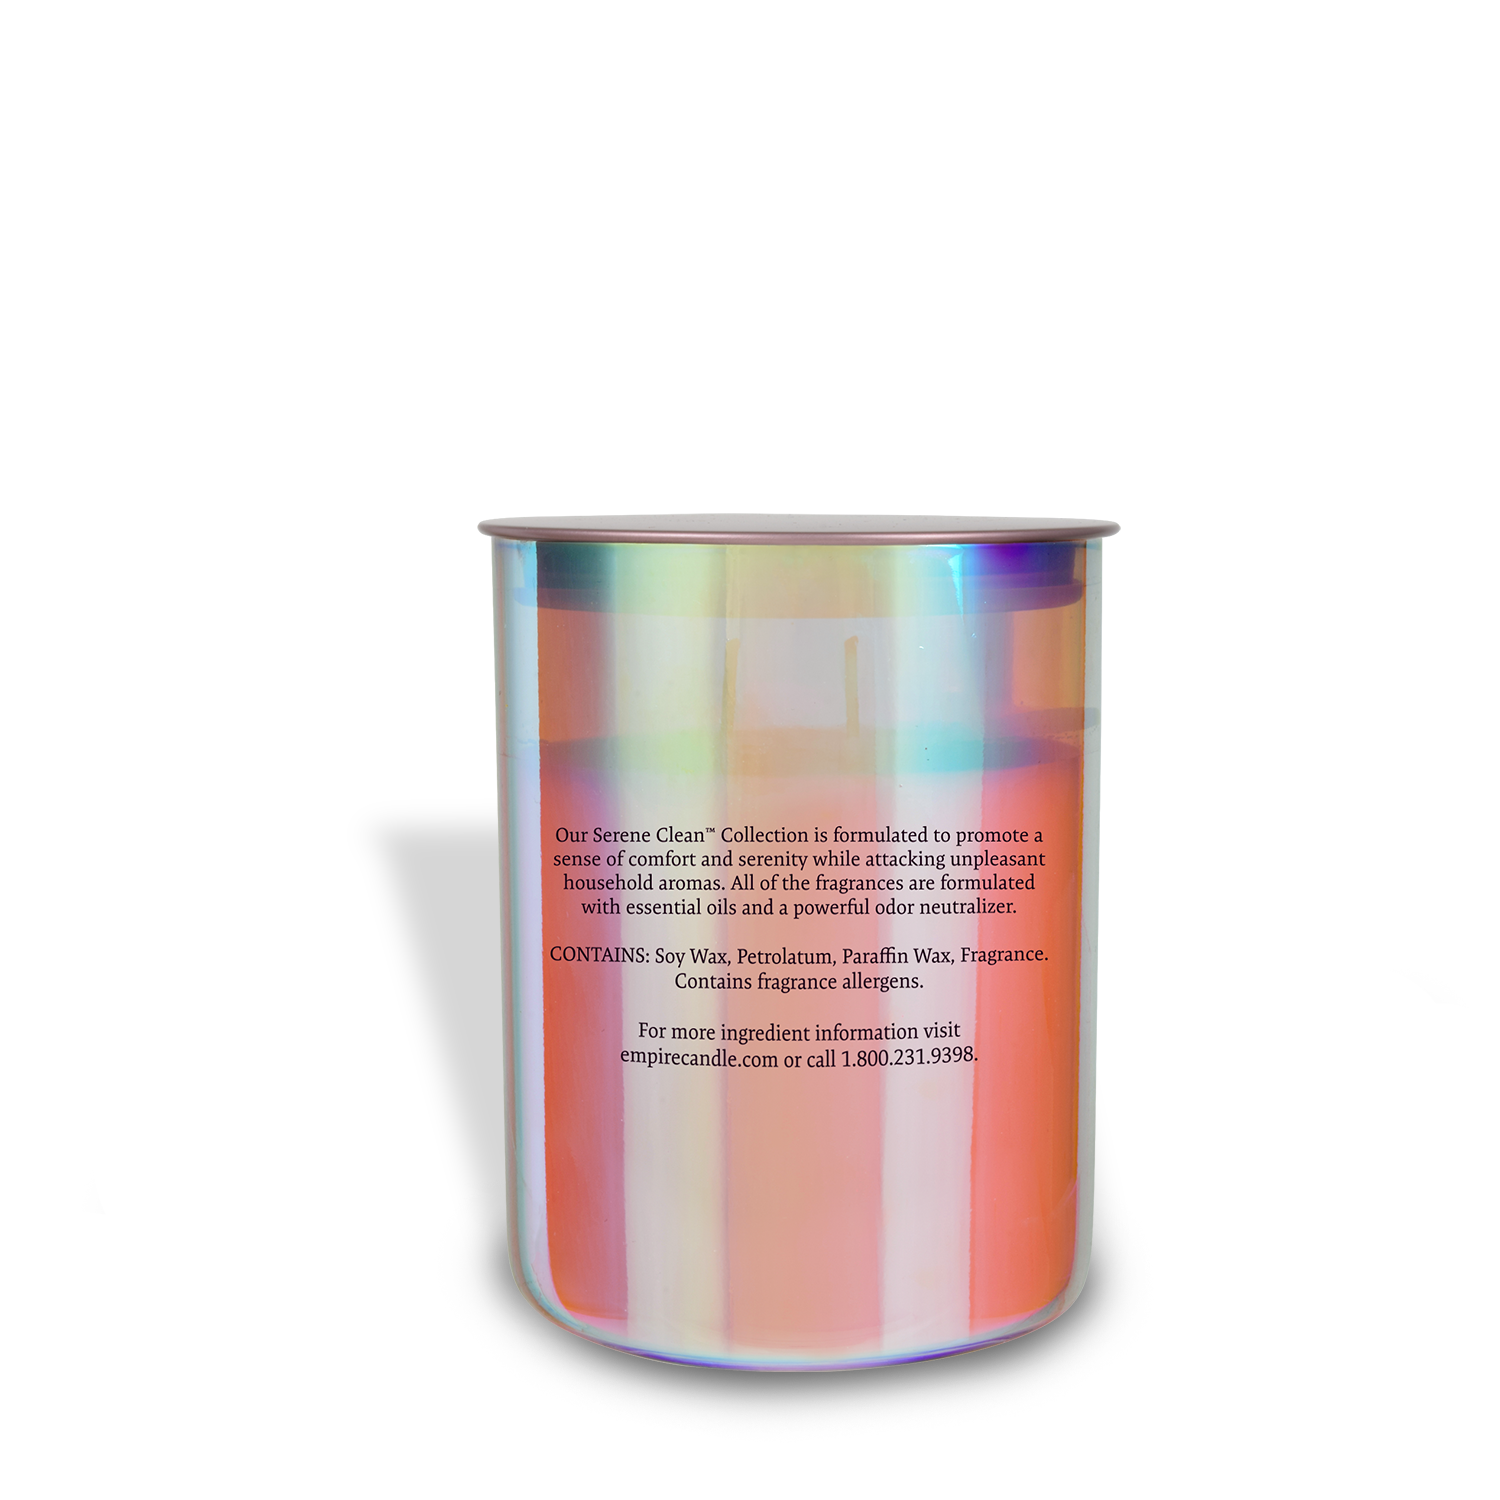 A tin container with an iridescent label on it, holding a Meadow Mist Scented Jar Candle (12 oz) from the Serene Clean Collection, featuring fragrance notes. Made by Tuscany Candle® EVD.